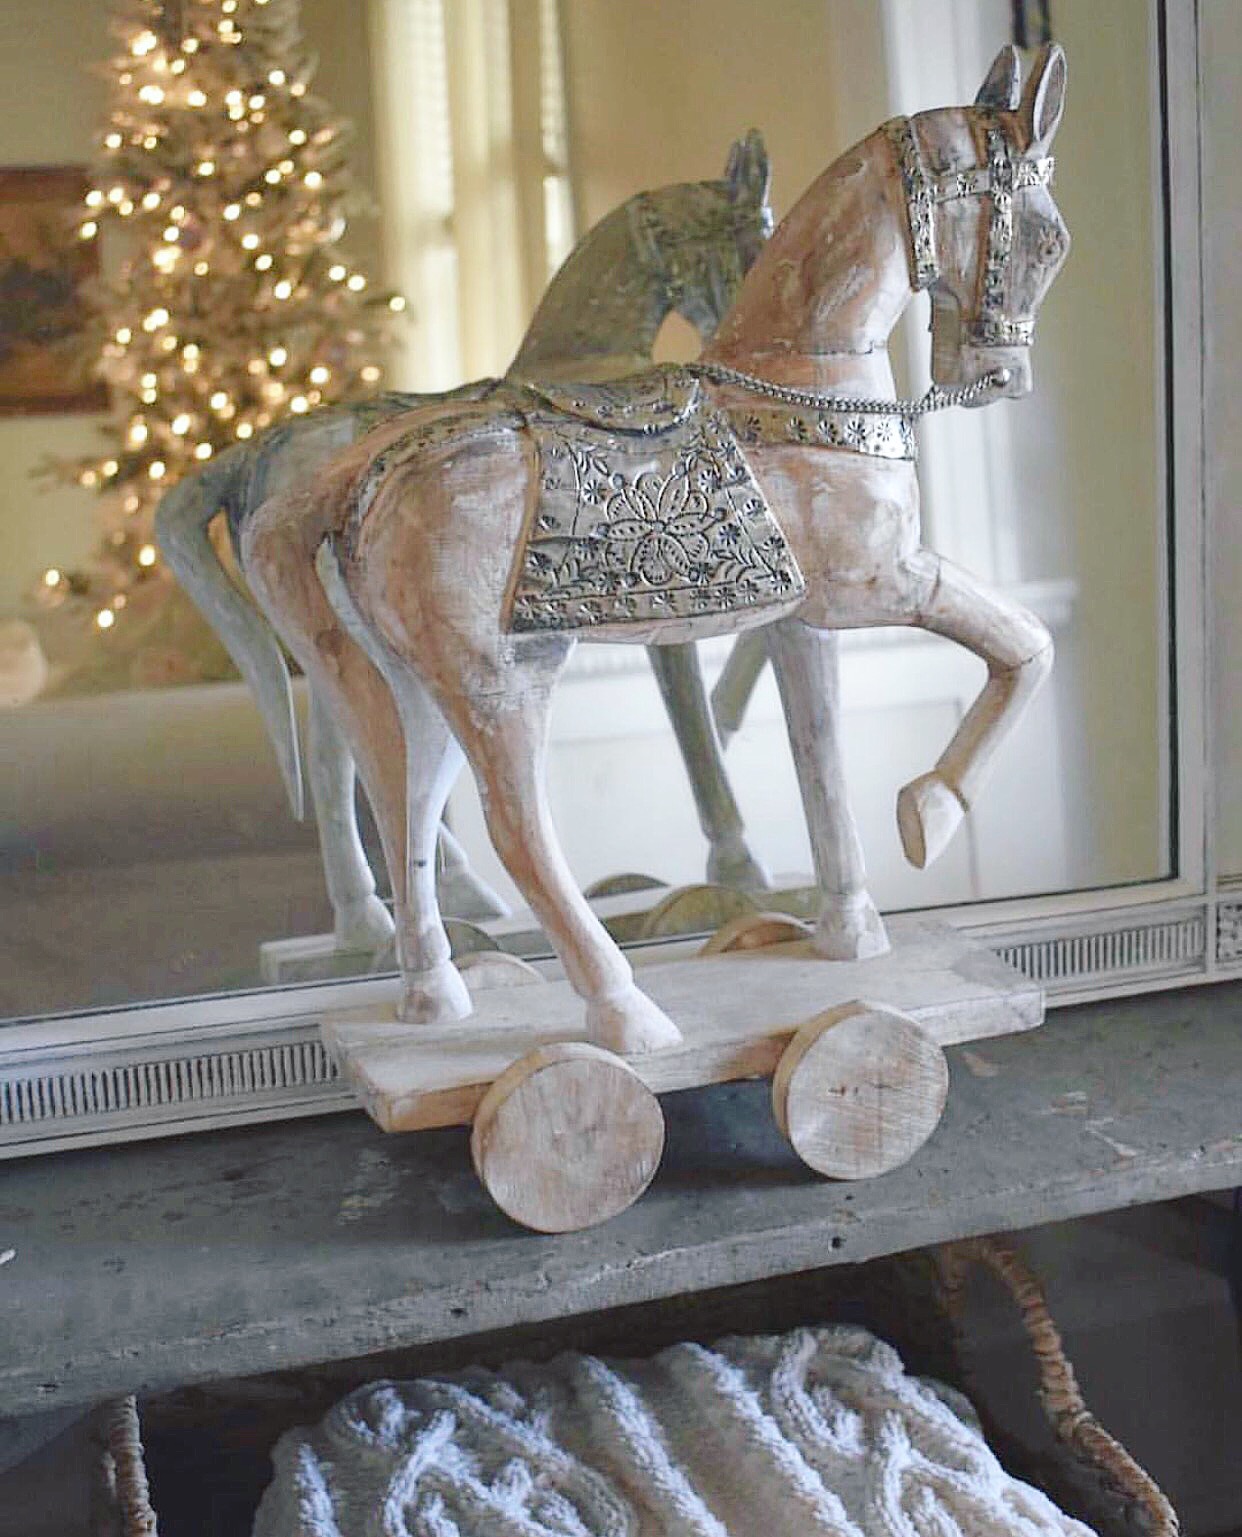 French Country Christmas Decorating Inspiration from Corner French Cottage! Come see more of the house tour! #frenchcountry #interiordesign #christmasdecor #shabbychic